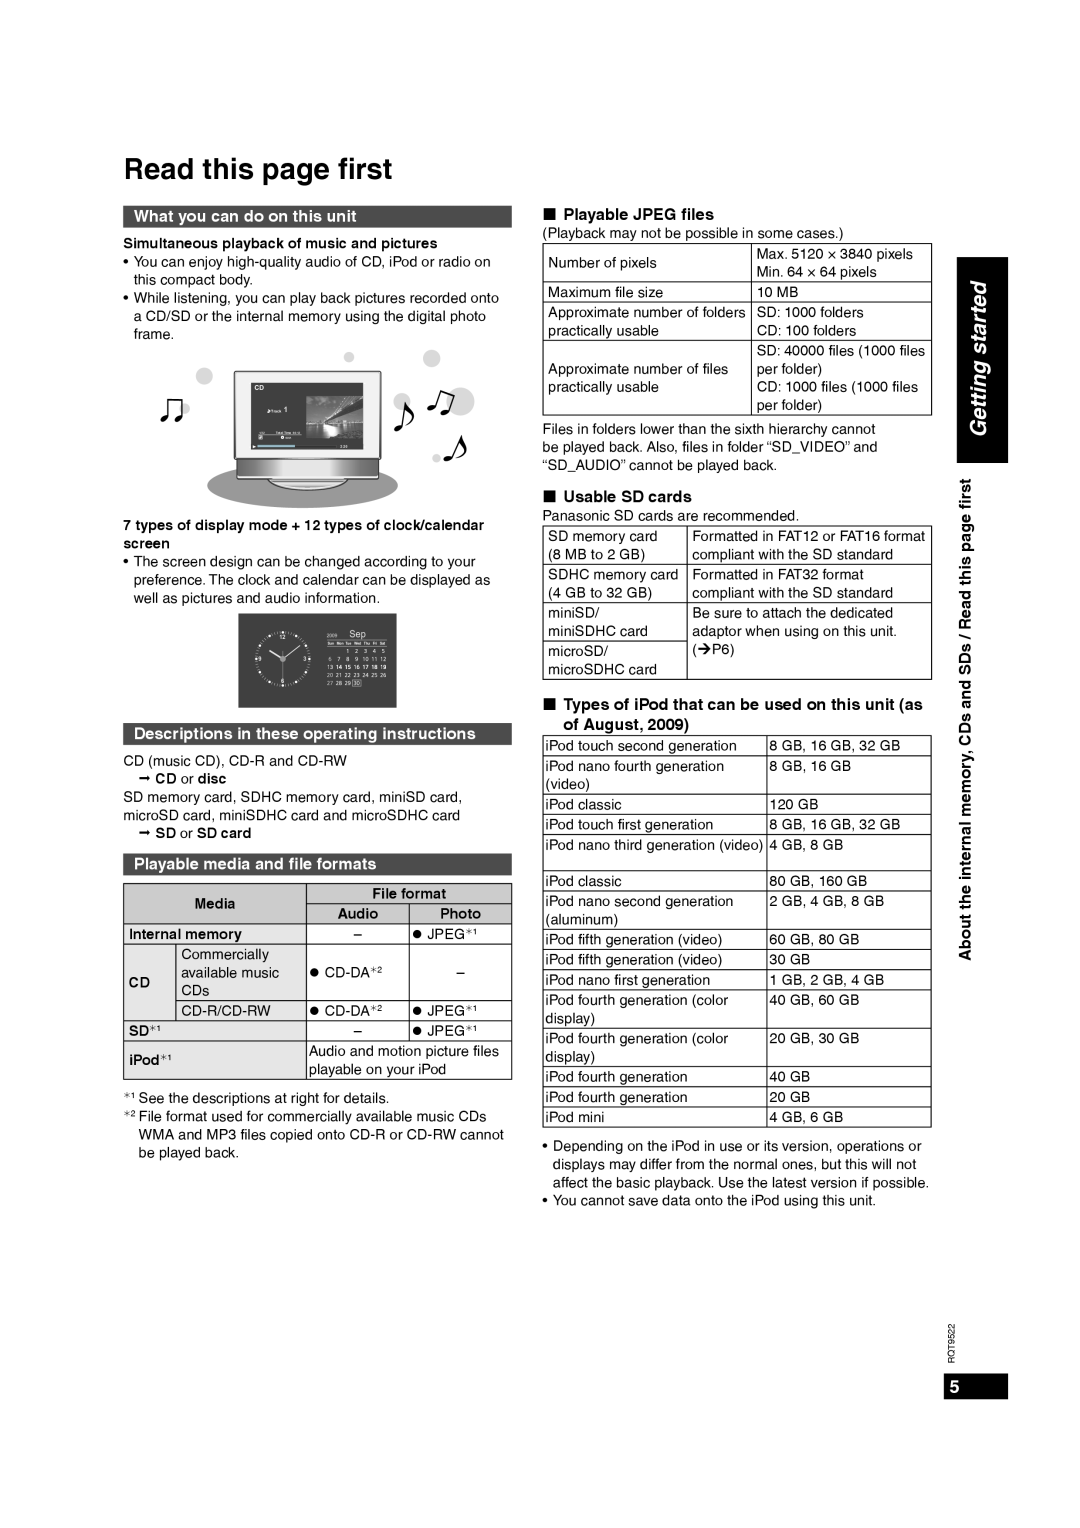 Panasonic MW-10 Read this page ﬁrst, What you can do on this unit, Descriptions in these operating instructions 